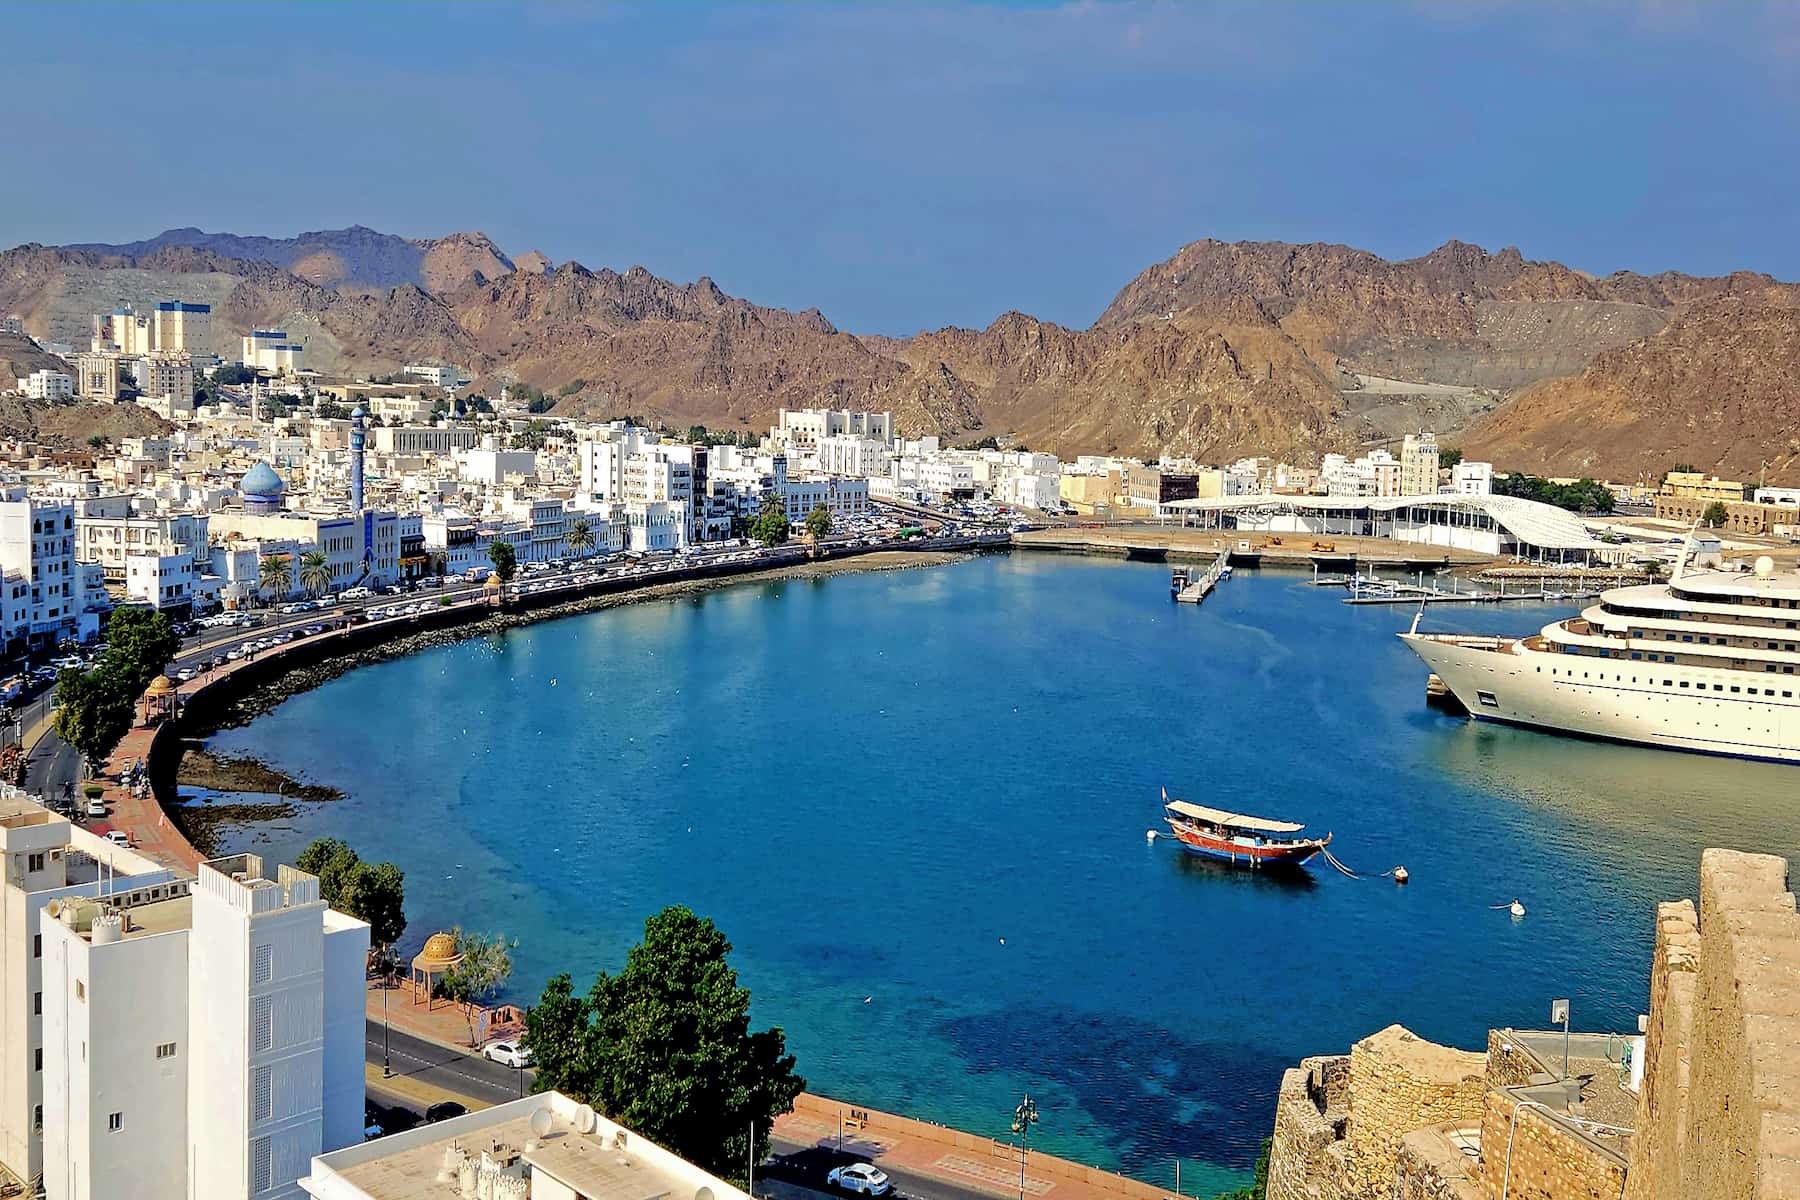 View of the legendary trading port of Mutrah. Photo by Edward Placidi